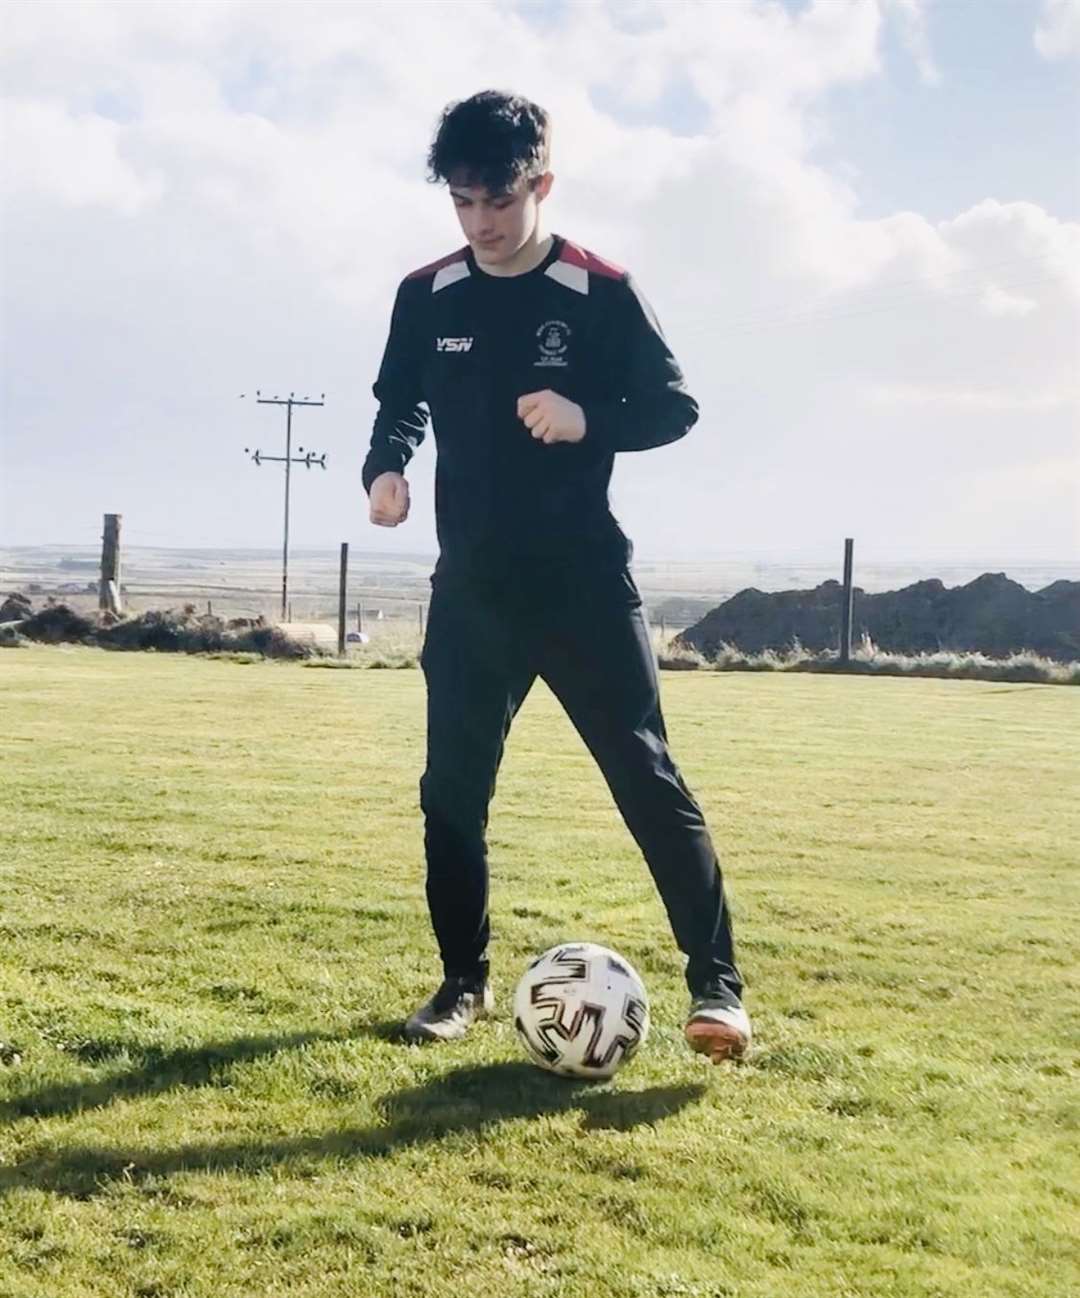 Euan Kennedy doing a tick-tock drill, keeping the ball under control while passing it between left foot and right foot.